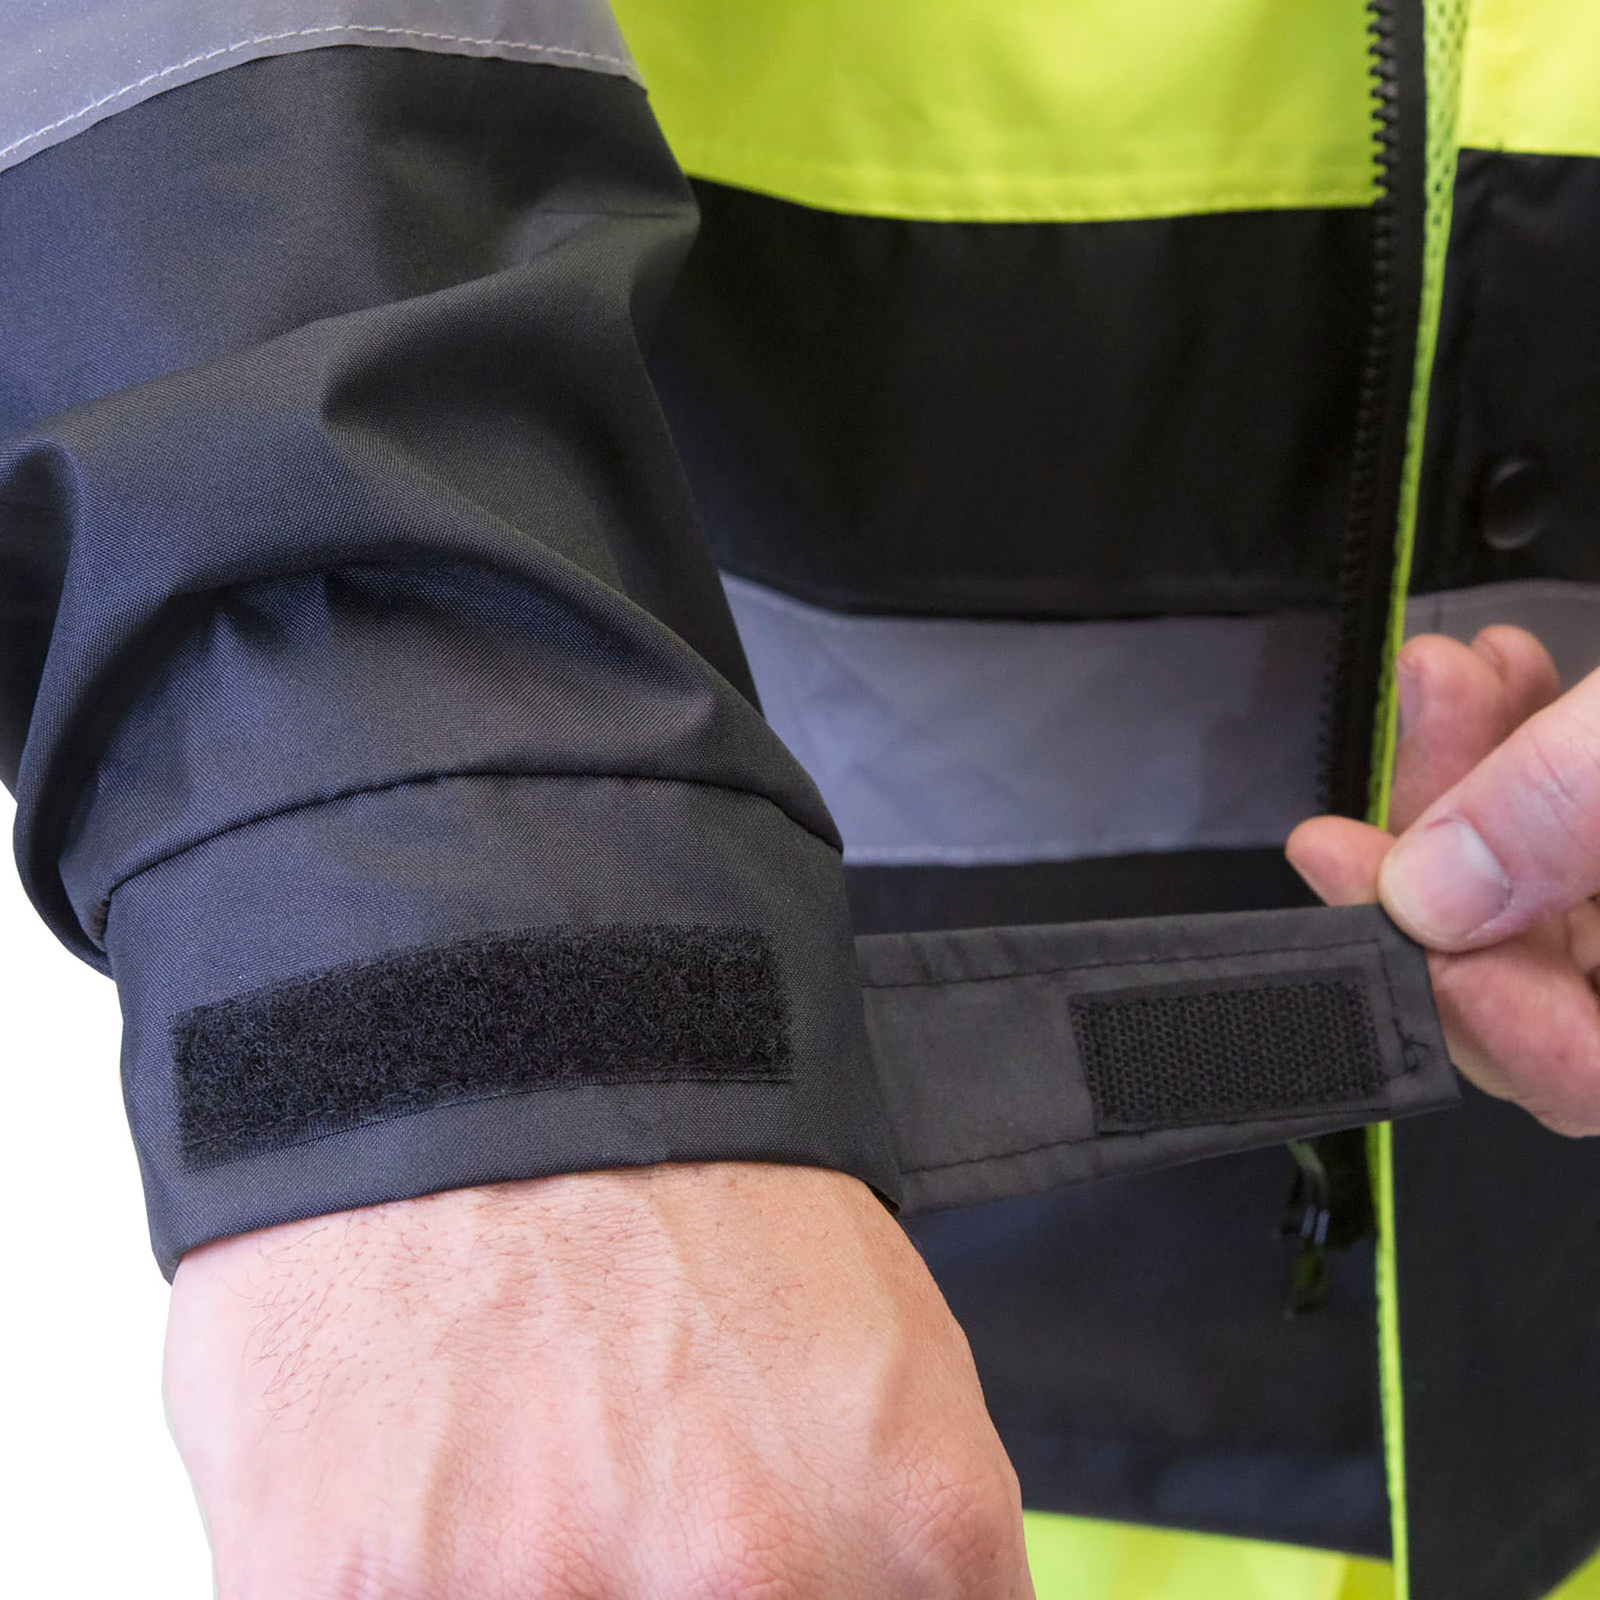 Man closing the strap of the size adjustable cuff the hi vis rain jacket. for road work